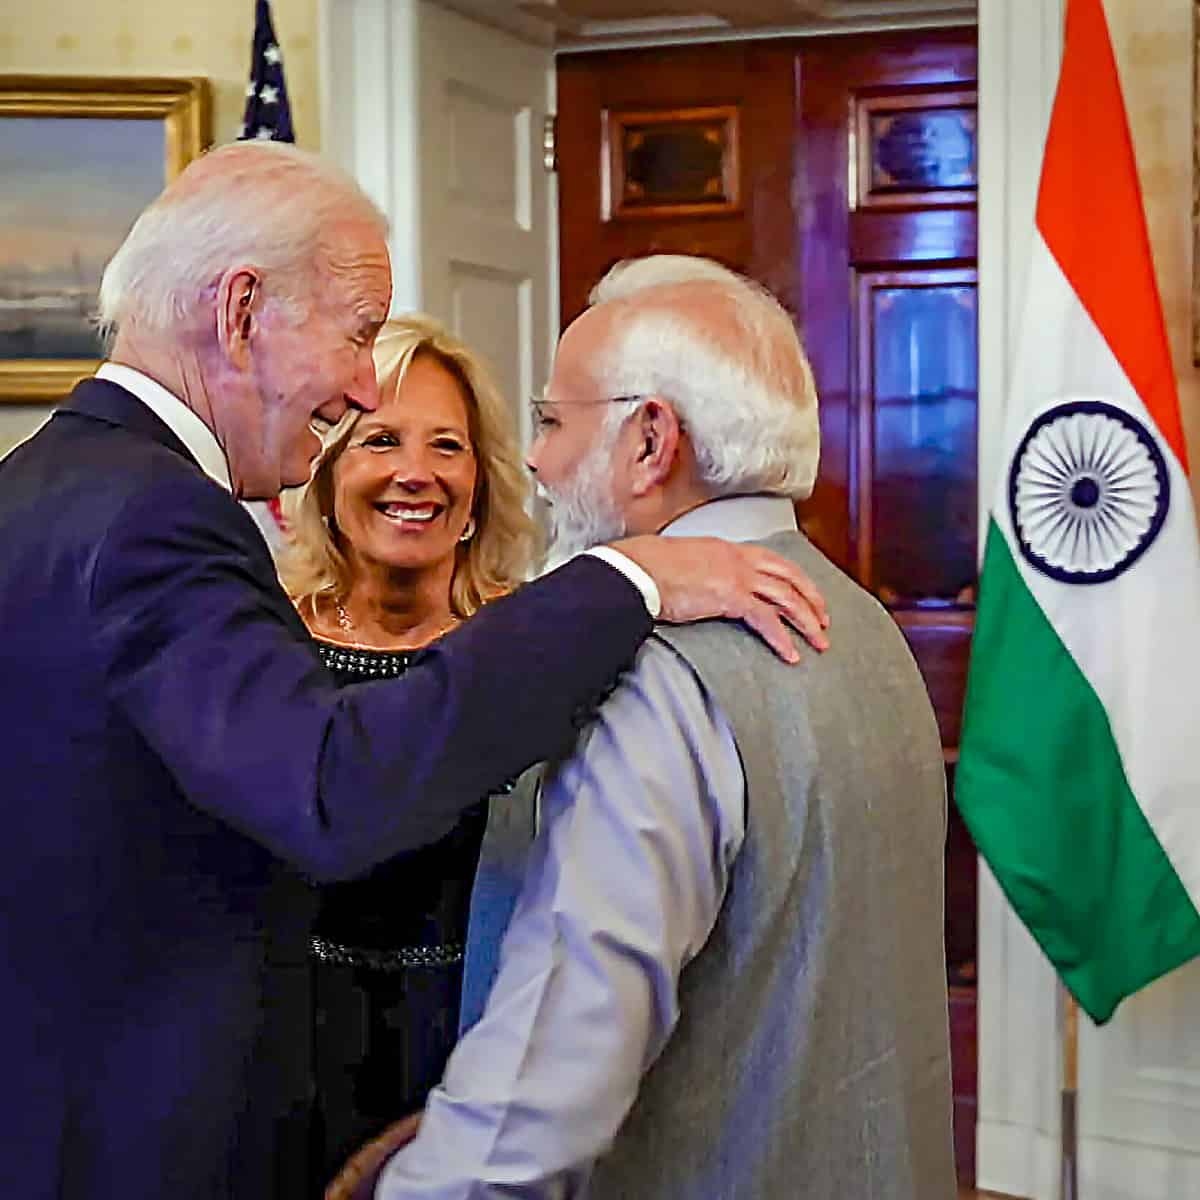 Modi's US visit sparks new Indo-US era of prosperity and security